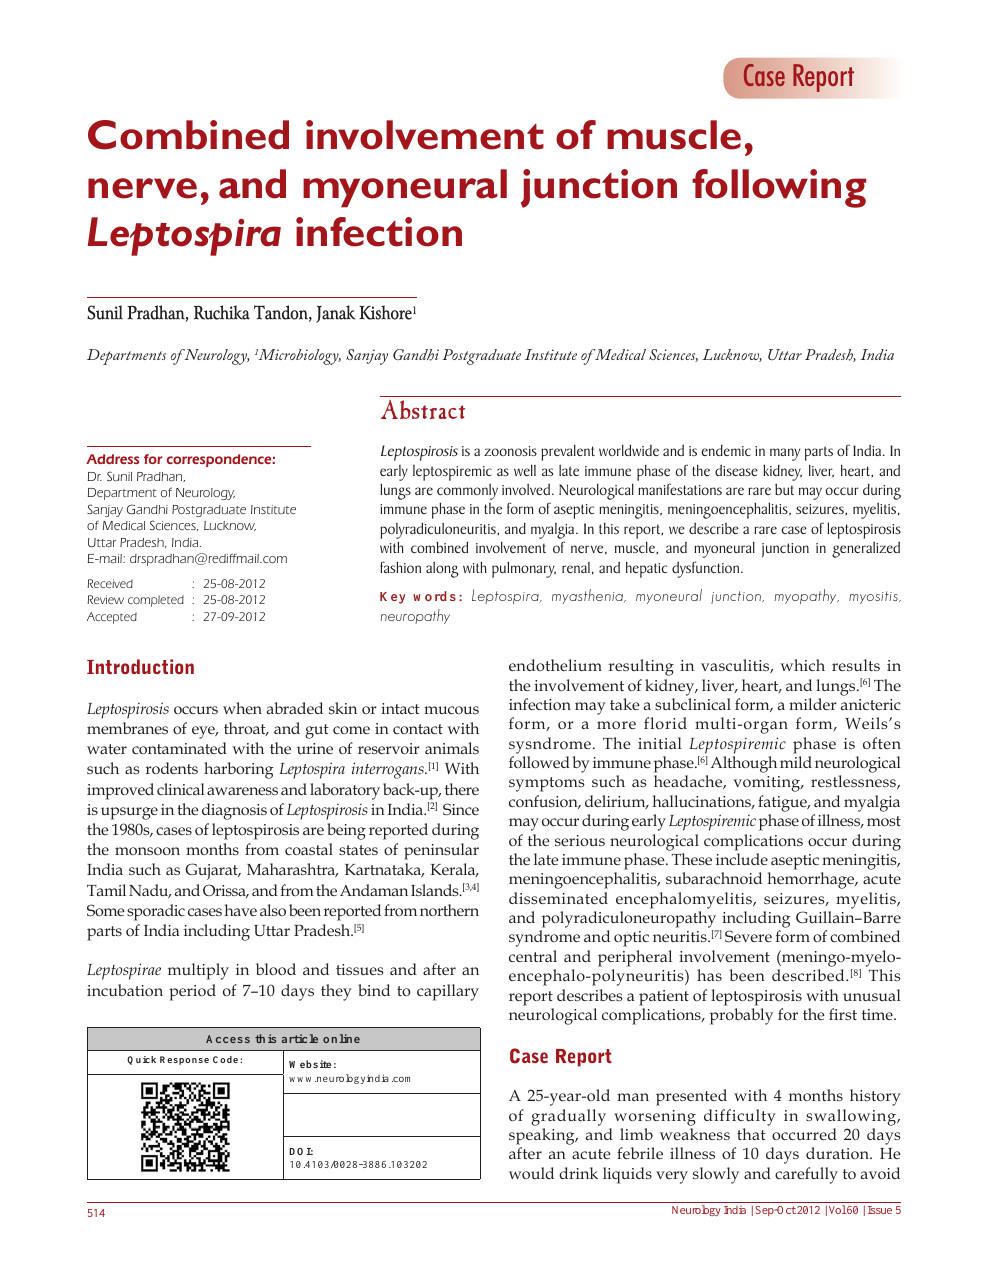 Combined involvement of muscle, nerve, and myoneural junction